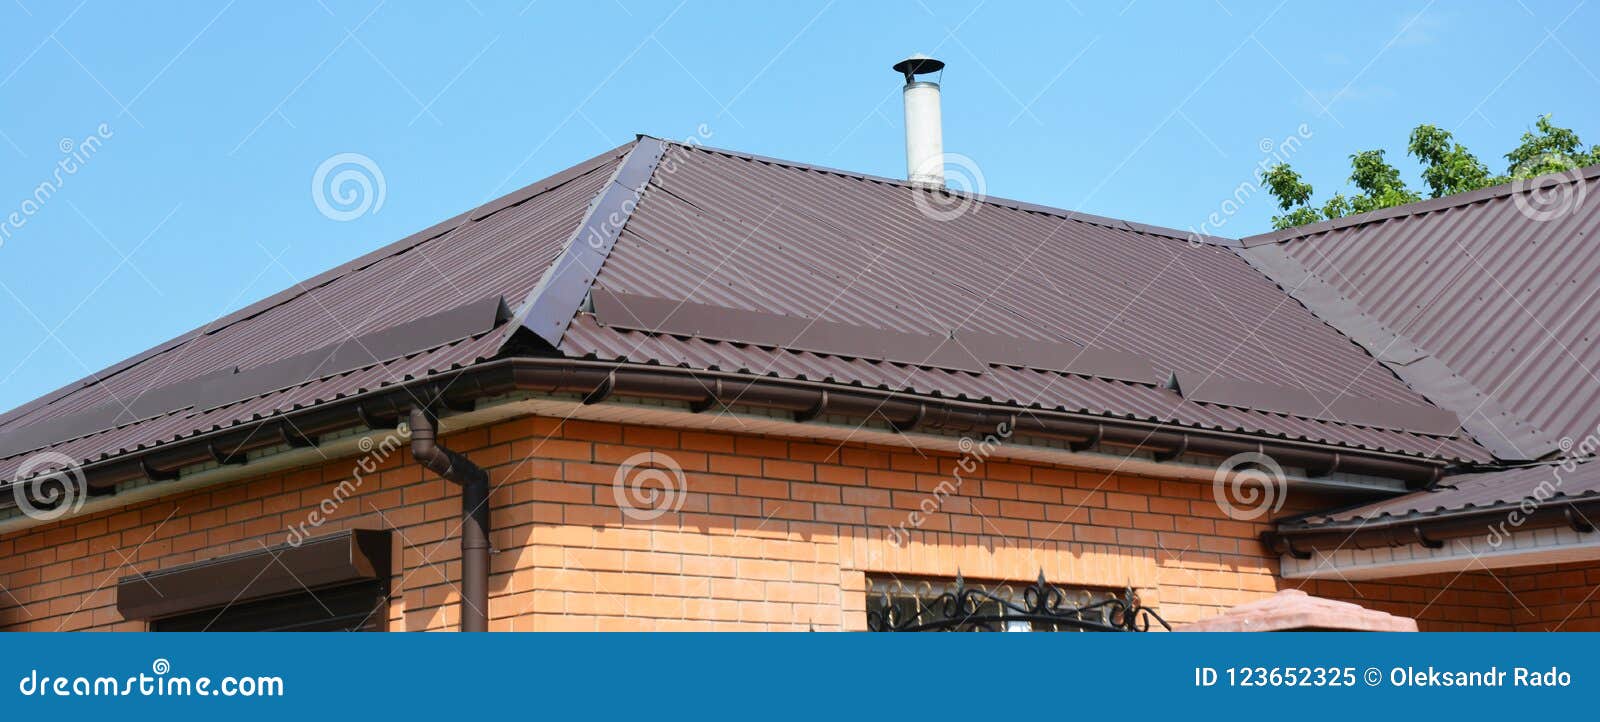 problem areas for metal roof and rain gutter waterproofing. guttering, gutters, metal roofing house panorama